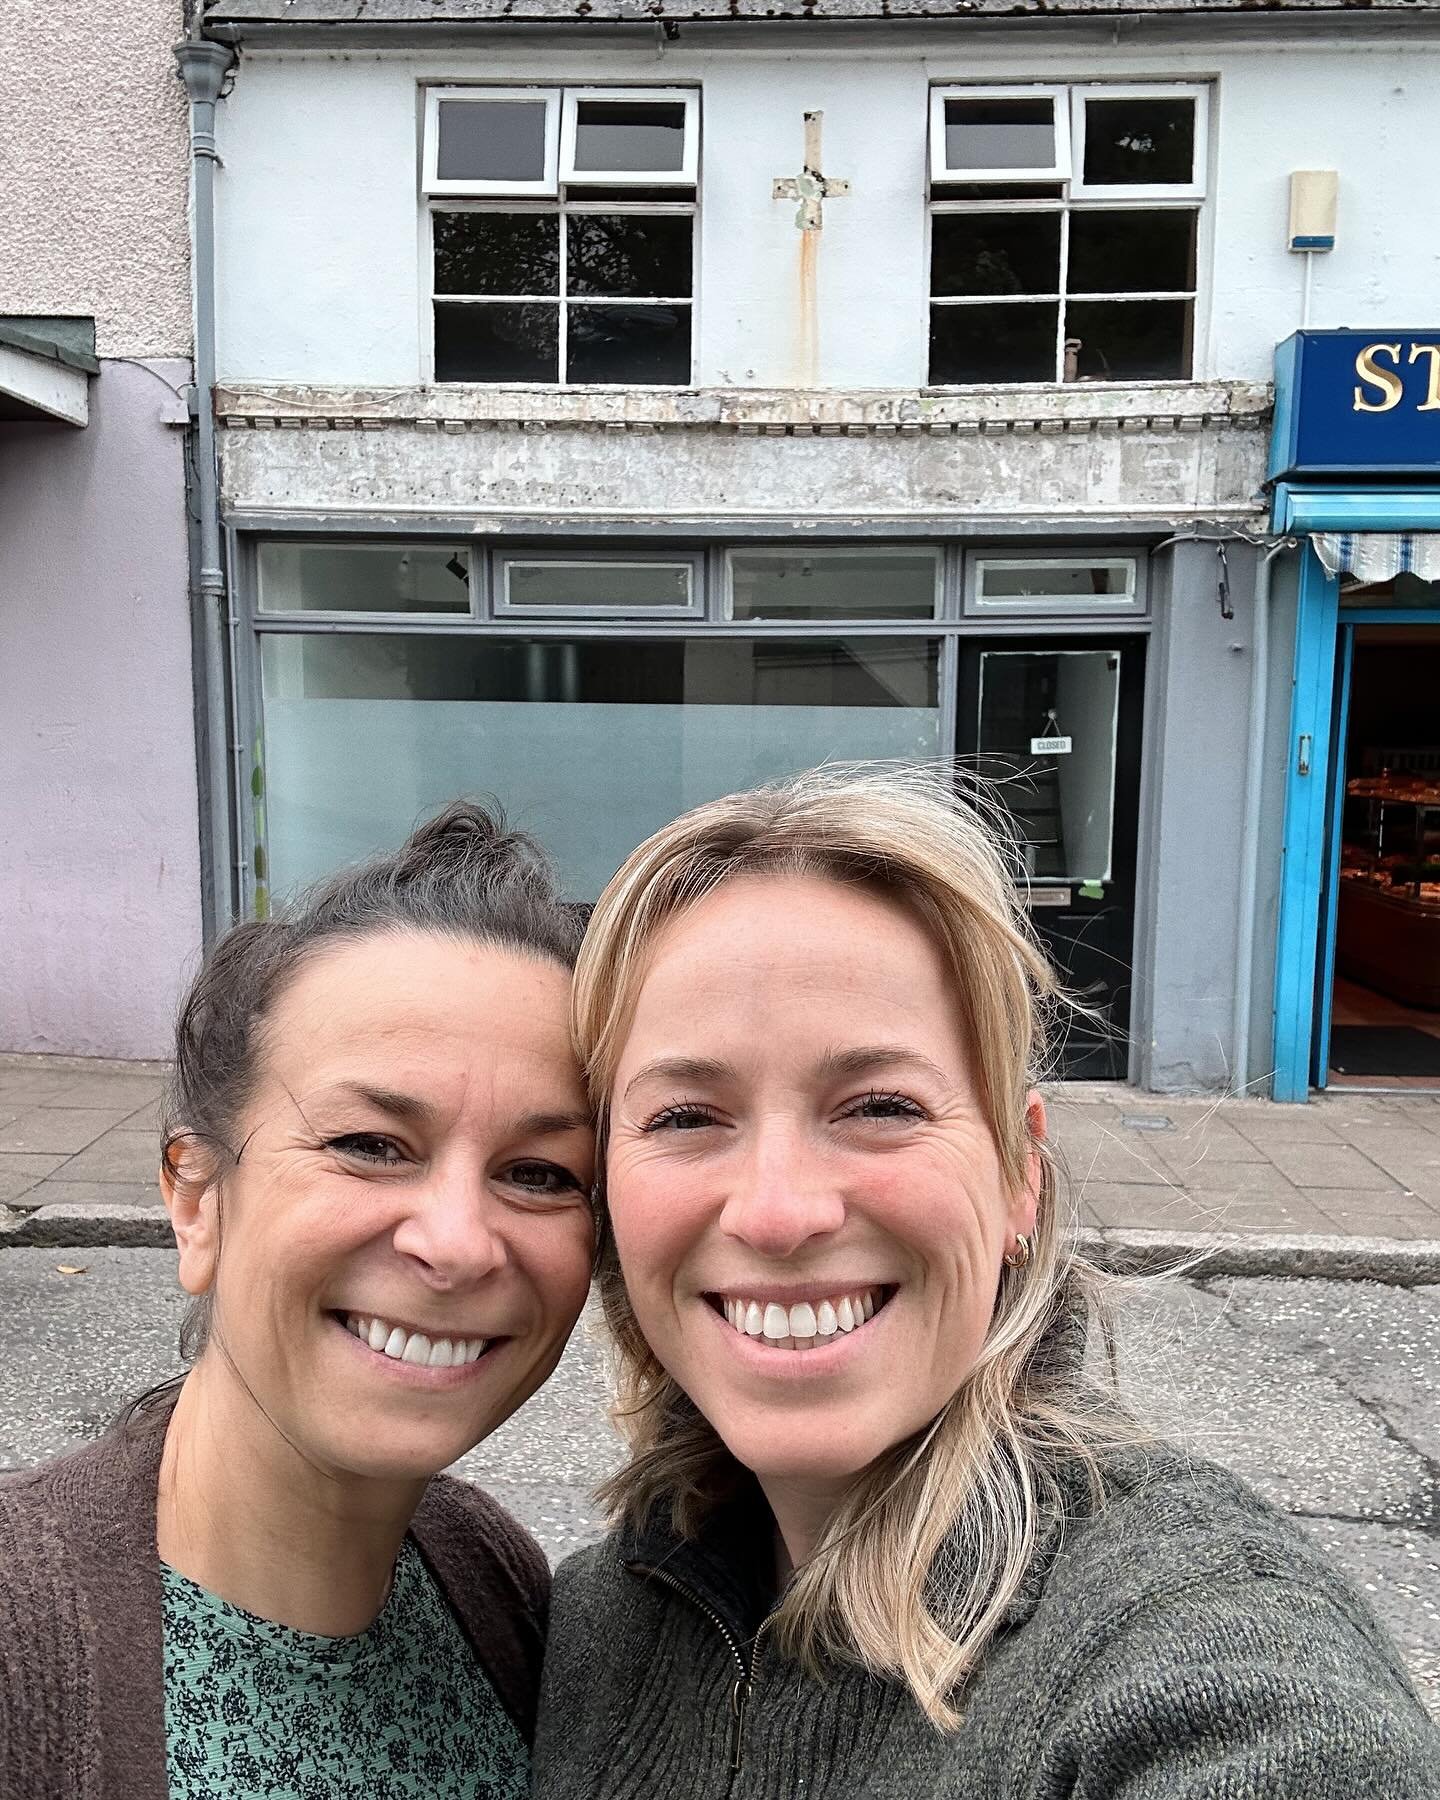 I&rsquo;m opening an art gallery! Ah! I&rsquo;ve been so excited to announce this!
My friend @alinaholyst.arch and I have rented this charming building in our village Rostrevor, County Down. We got the keys a month ago and are in the middle of transf